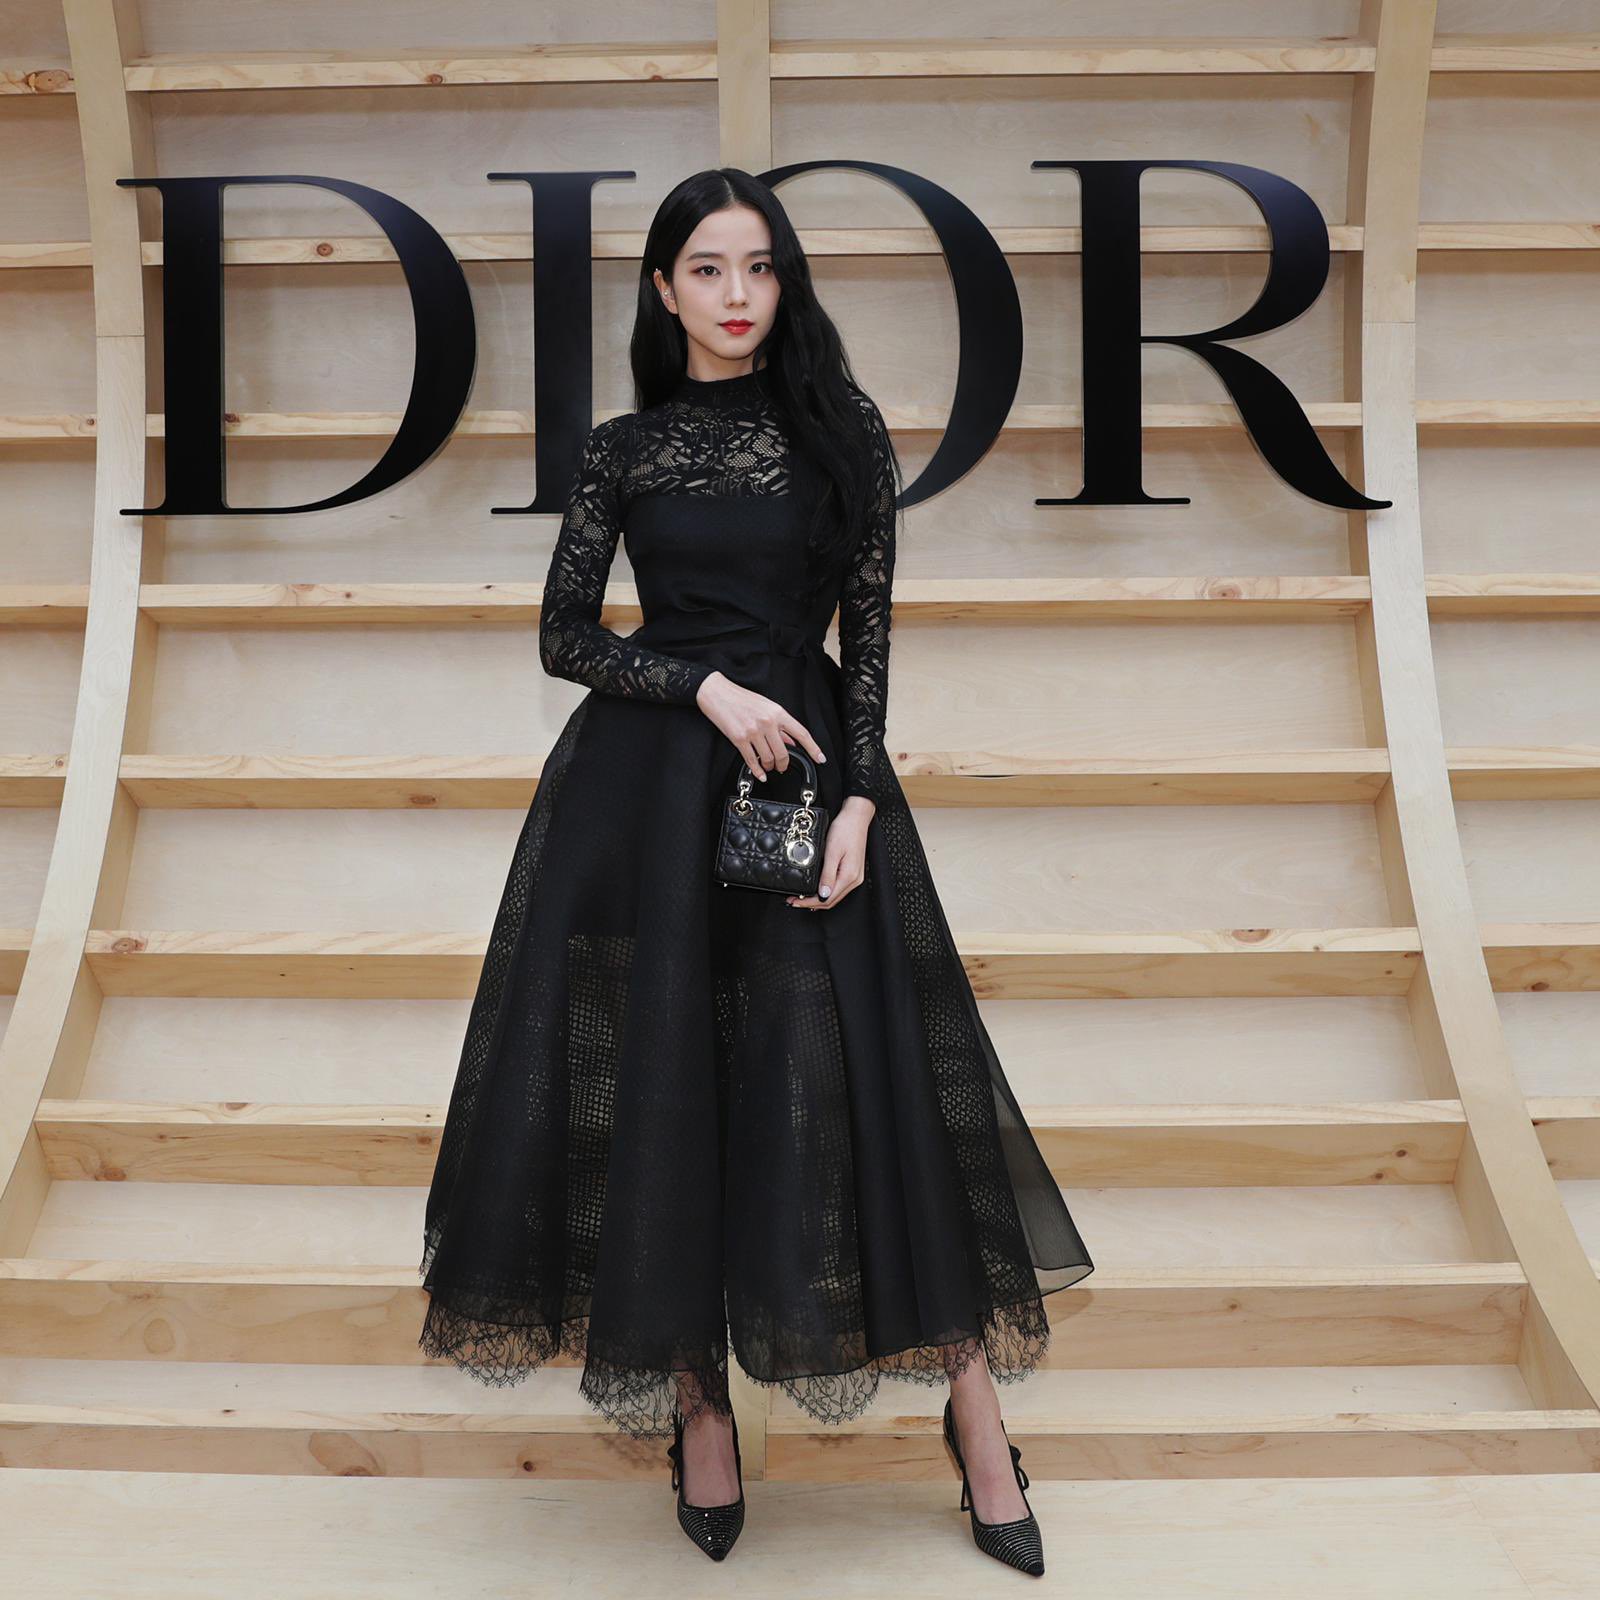 𝙲. 🕊 on Twitter  Dior outfit, Fashion, Lady dior